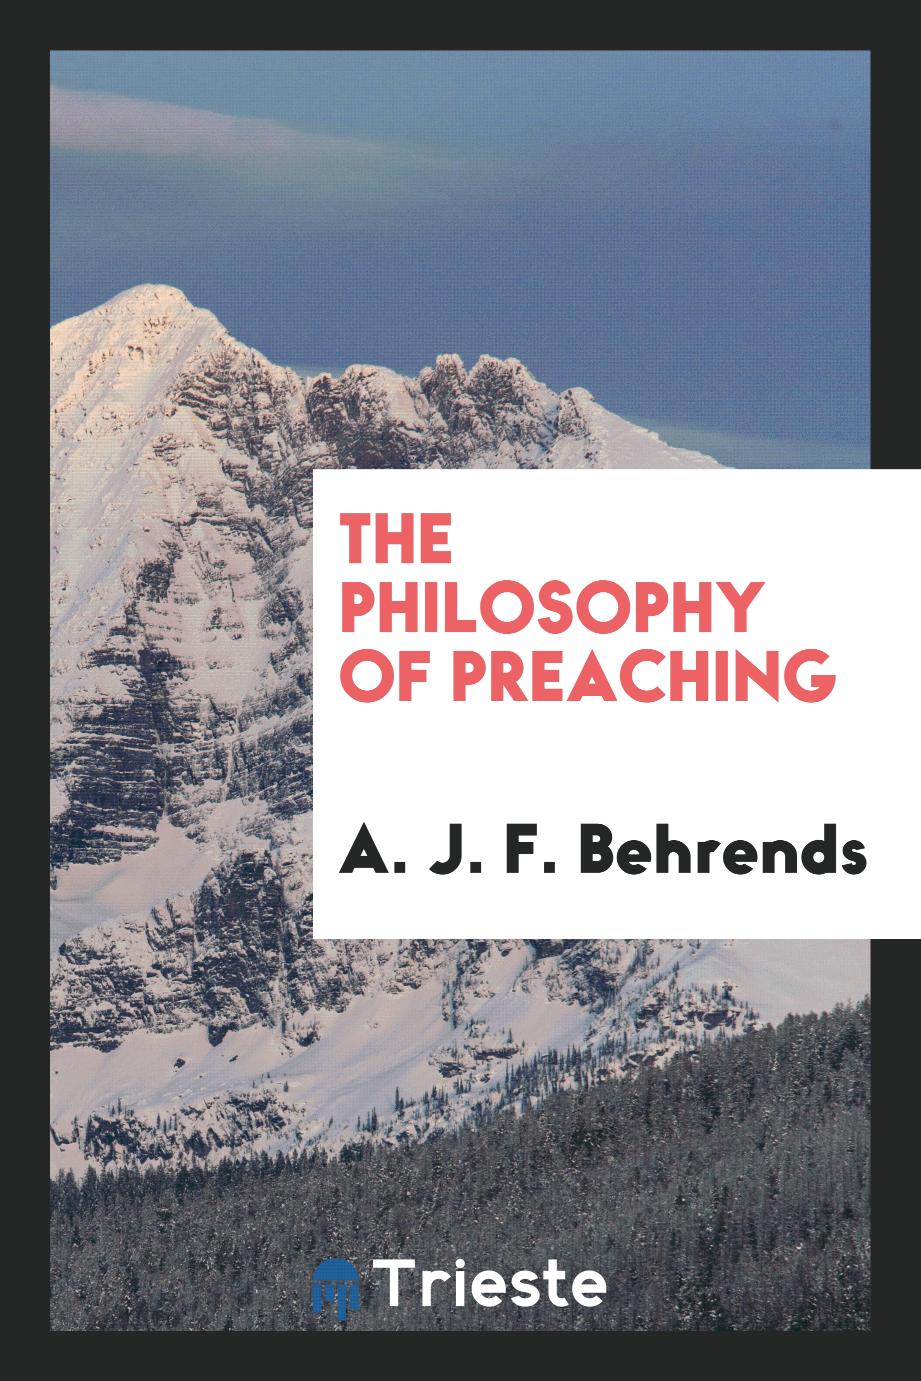 The philosophy of preaching